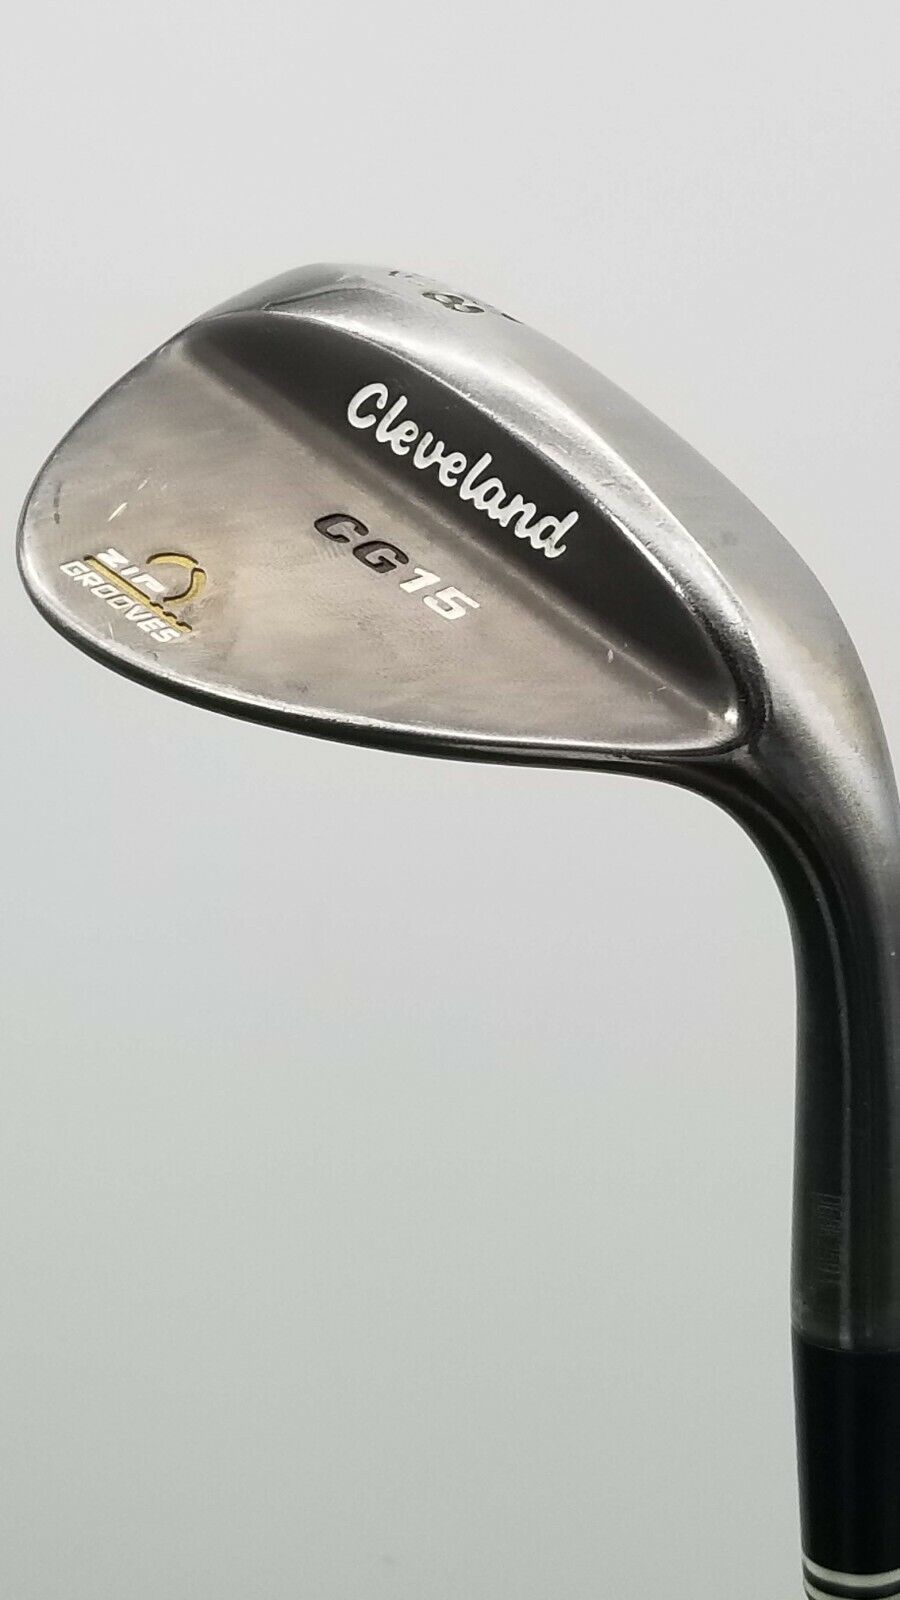 CLEVELAND CG15 WEDGE 58*/12 WEDGE CLEVELAND TRACTION SHAFT FAIR